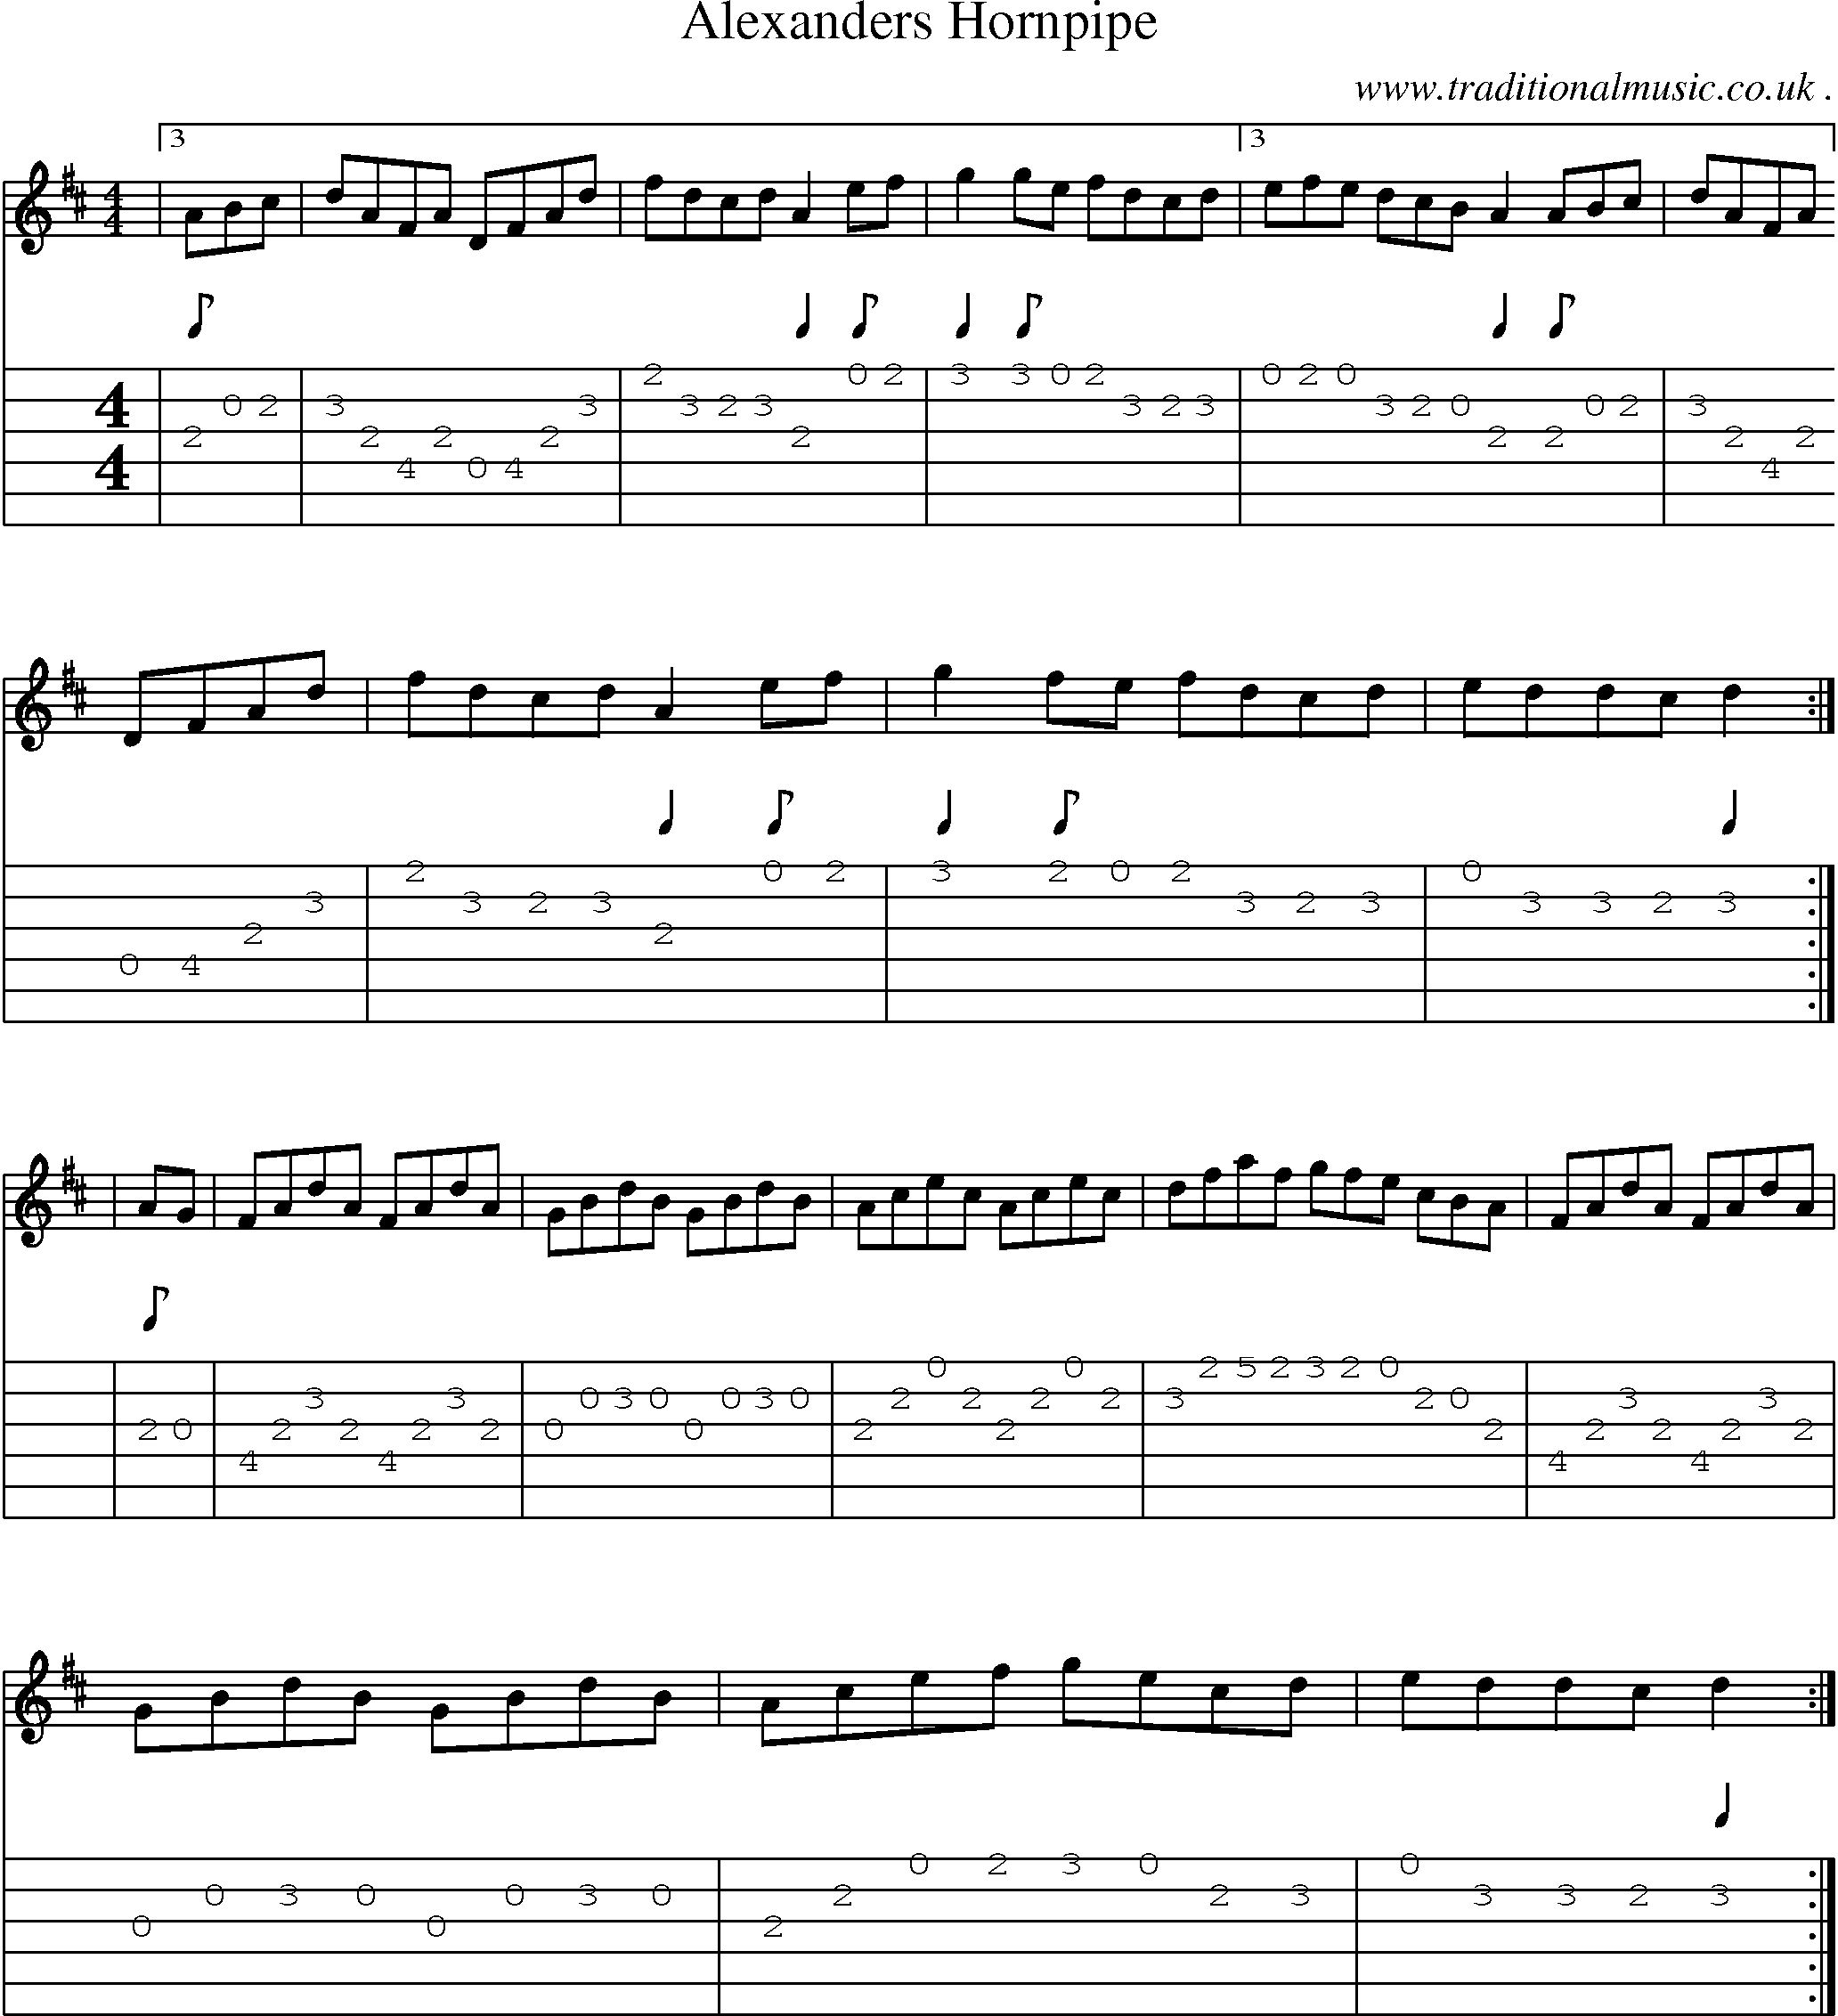 Sheet-Music and Guitar Tabs for Alexanders Hornpipe